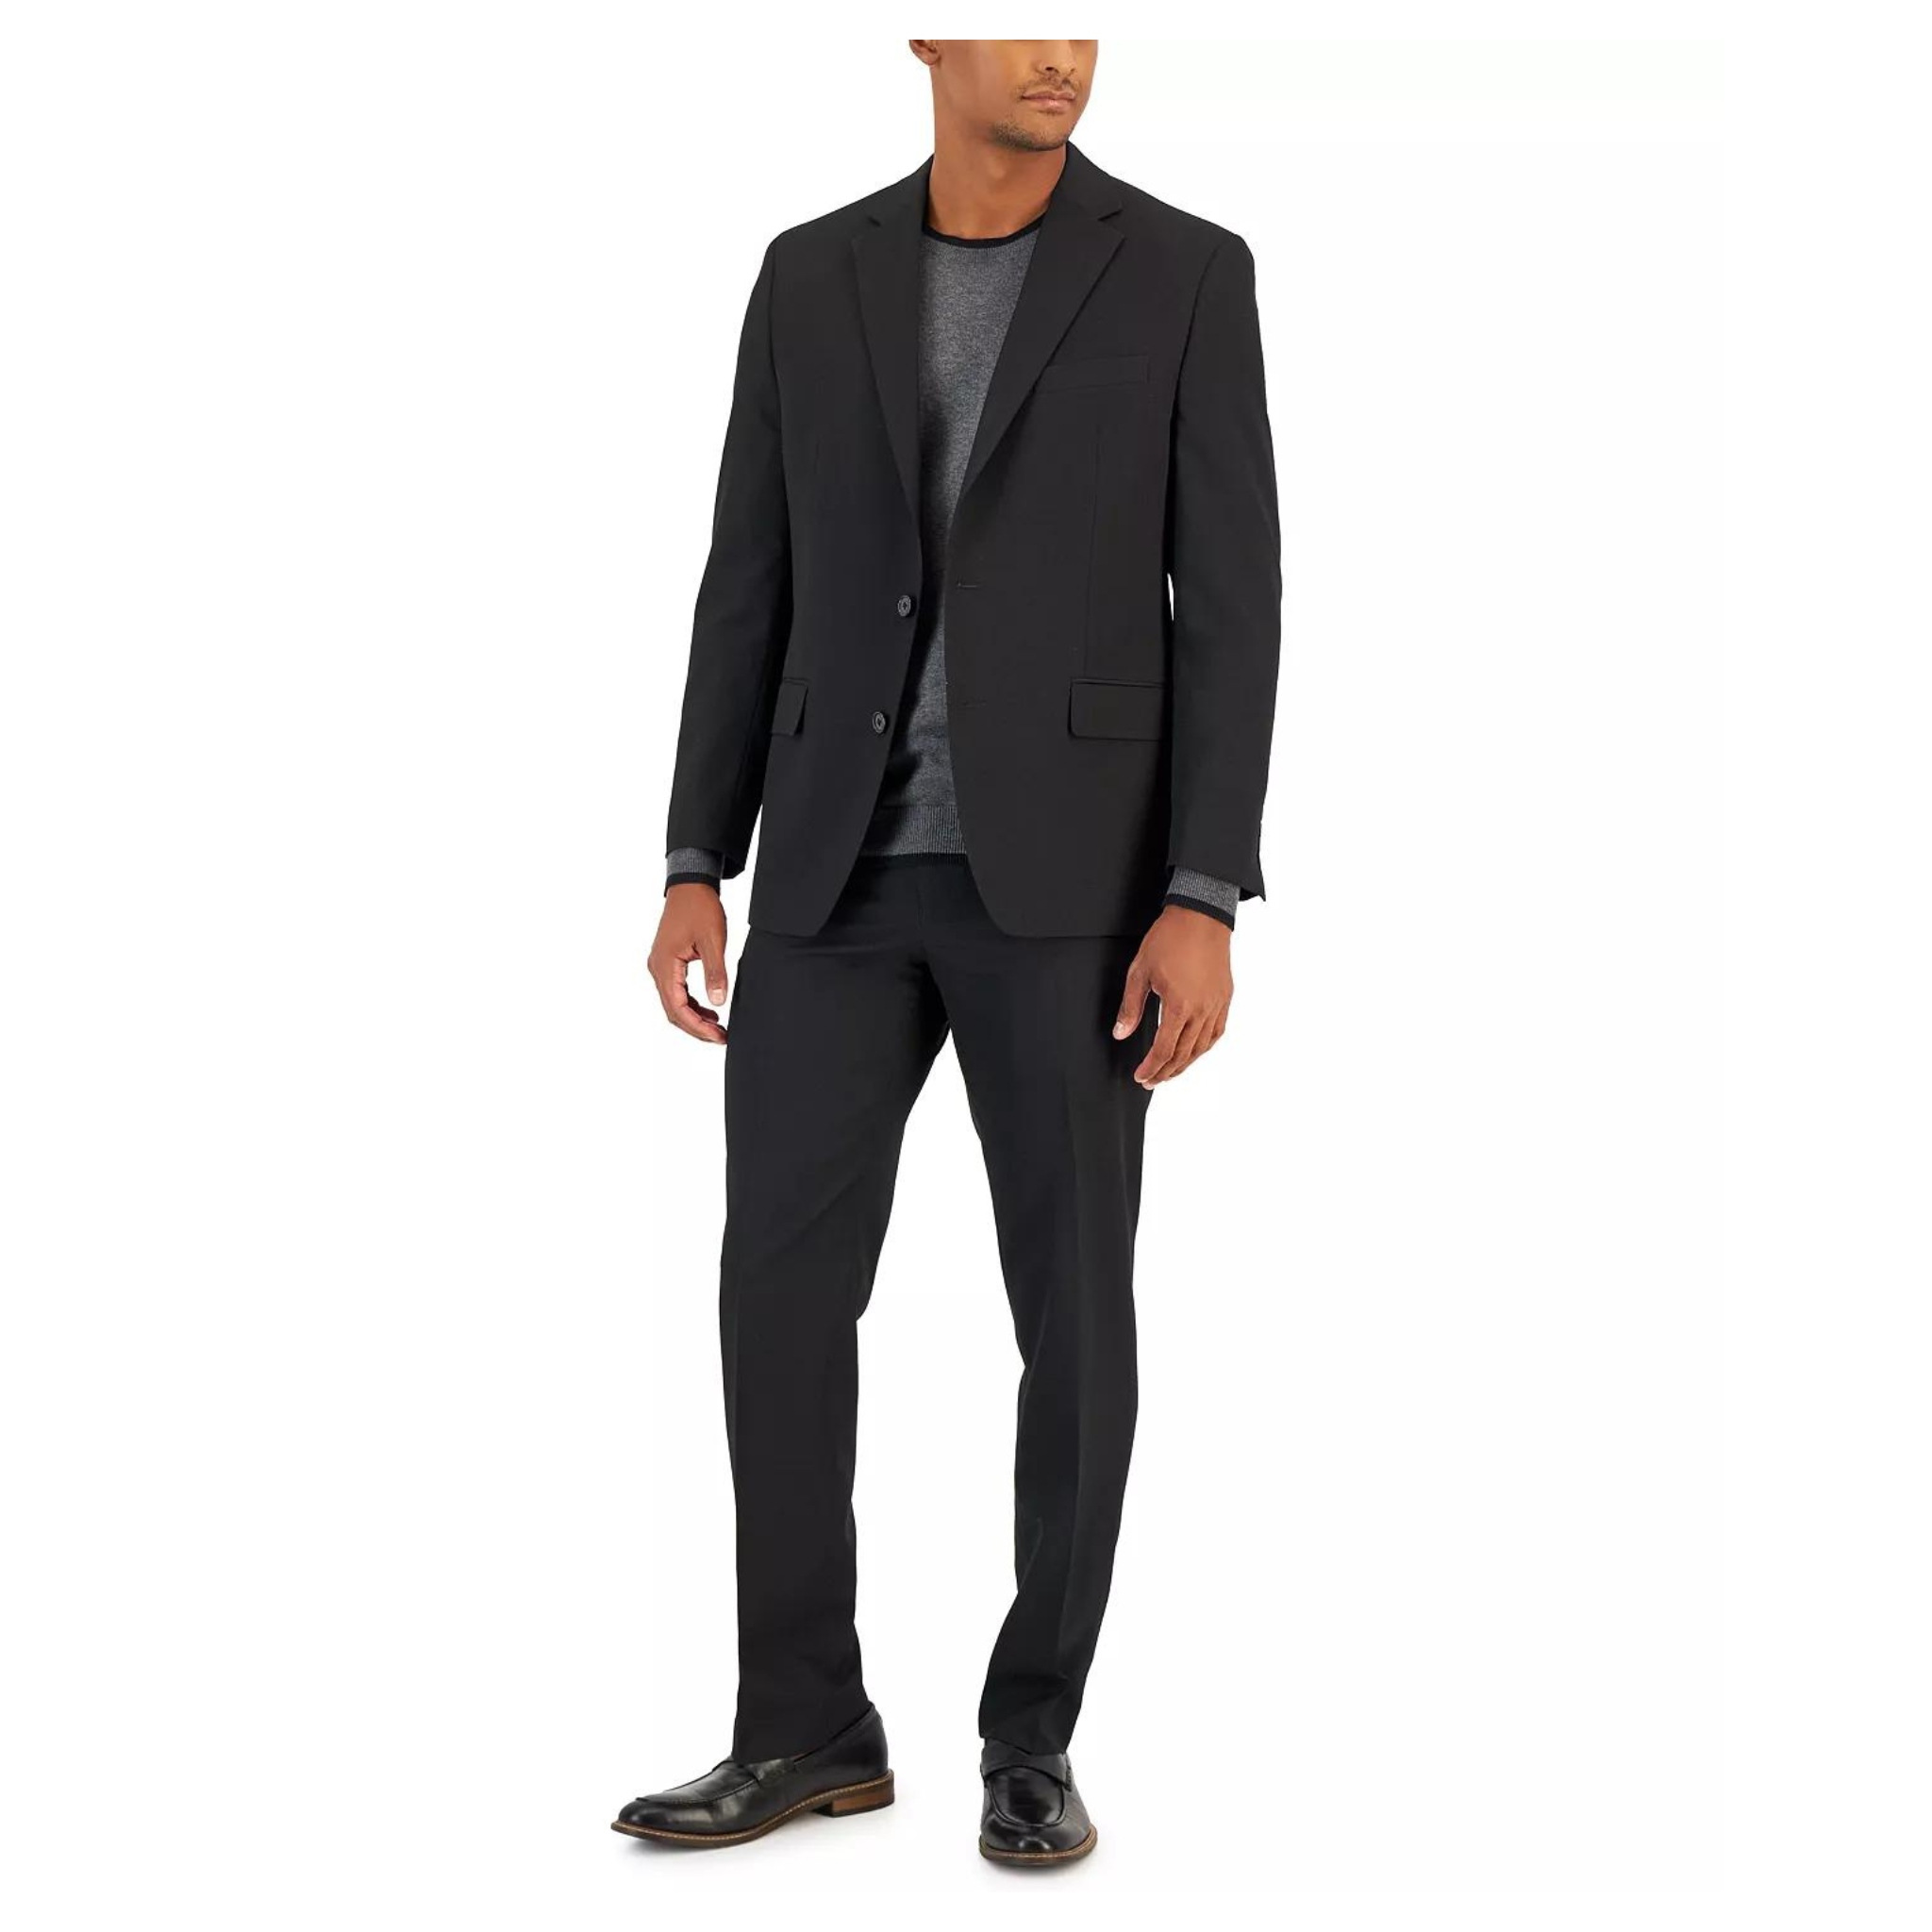 50-70% Off Men's Coats, Shoes, Jackets, Shirts, And More